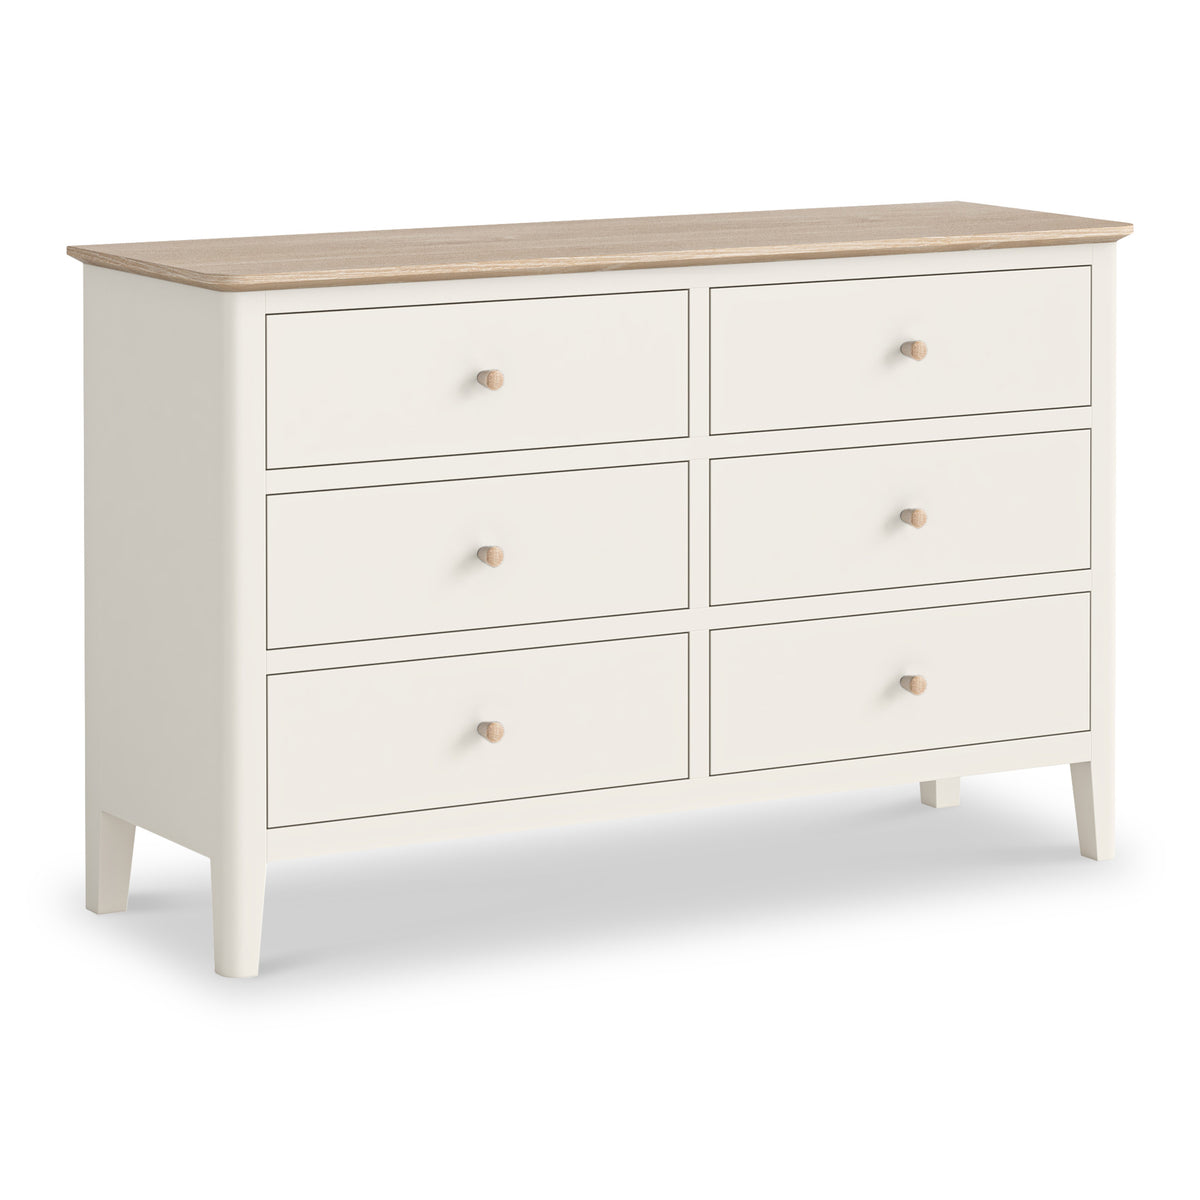 Penrose Coconut White 6 Drawer Chest with wooden handles